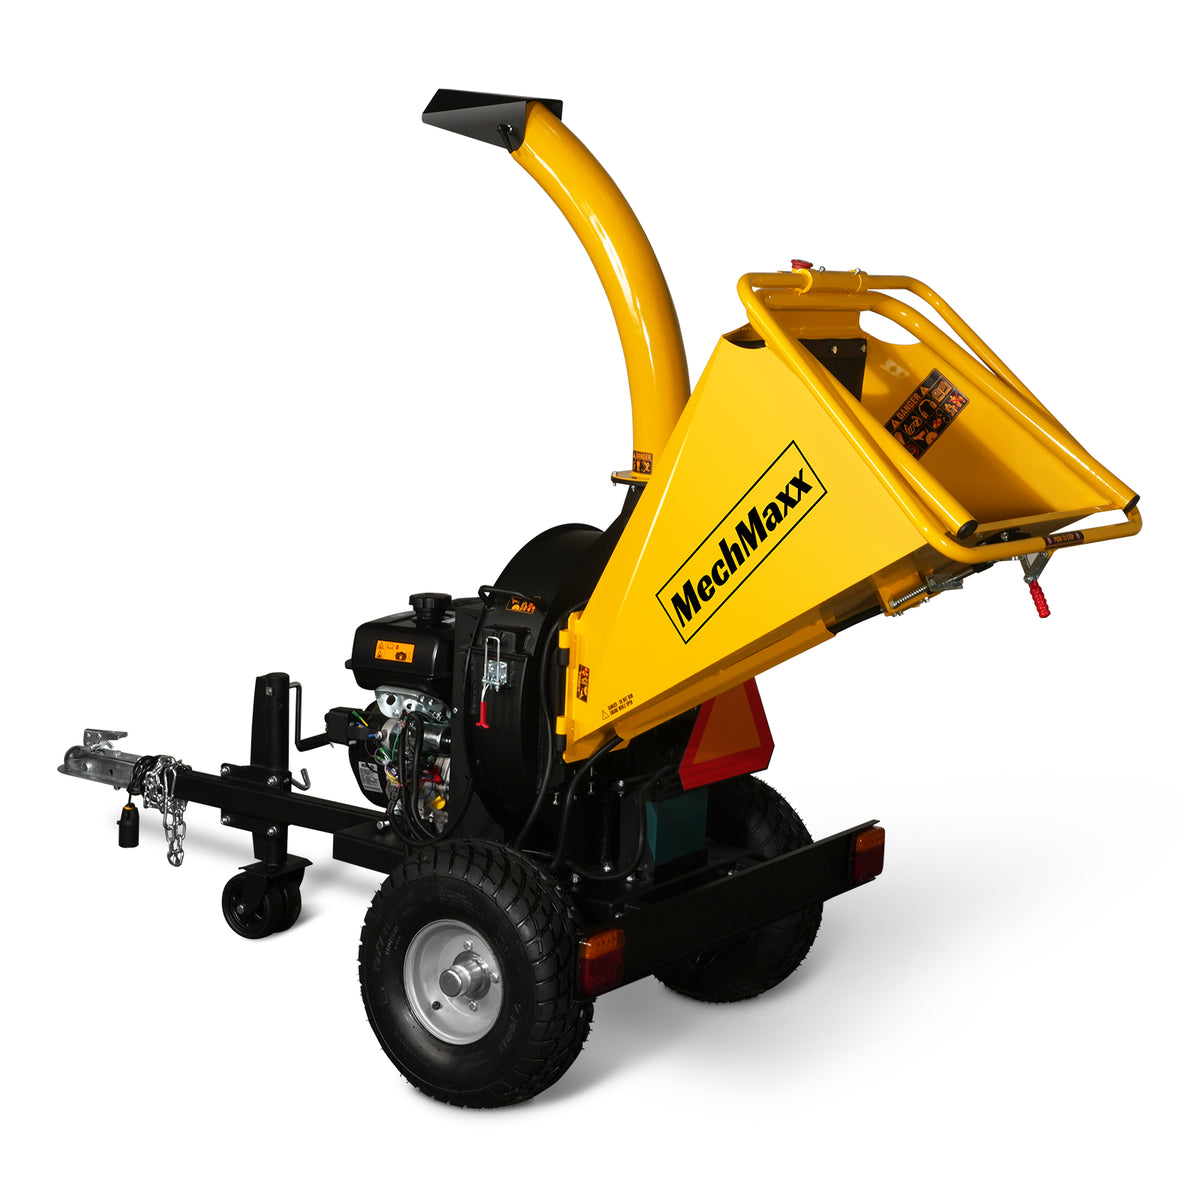 5 inch E-stat KOHLER 429cc 14hp Gasoline Engine Powered Disc Wood Chipper with Taillight